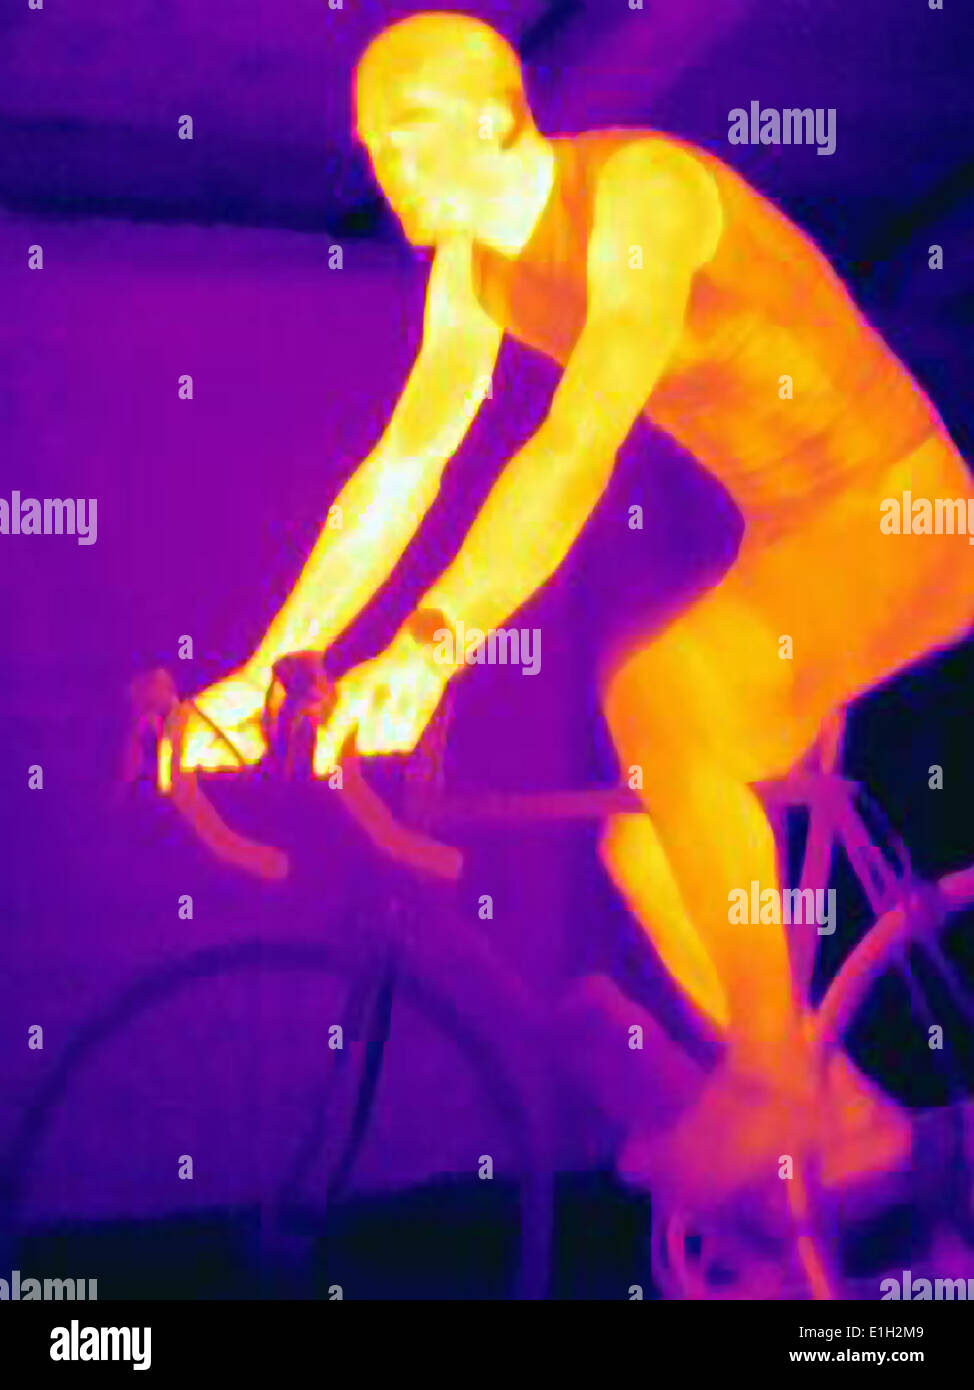 Thermal image of young male cyclist in training, showing the heat of the muscles and of the bicycle tires Stock Photo